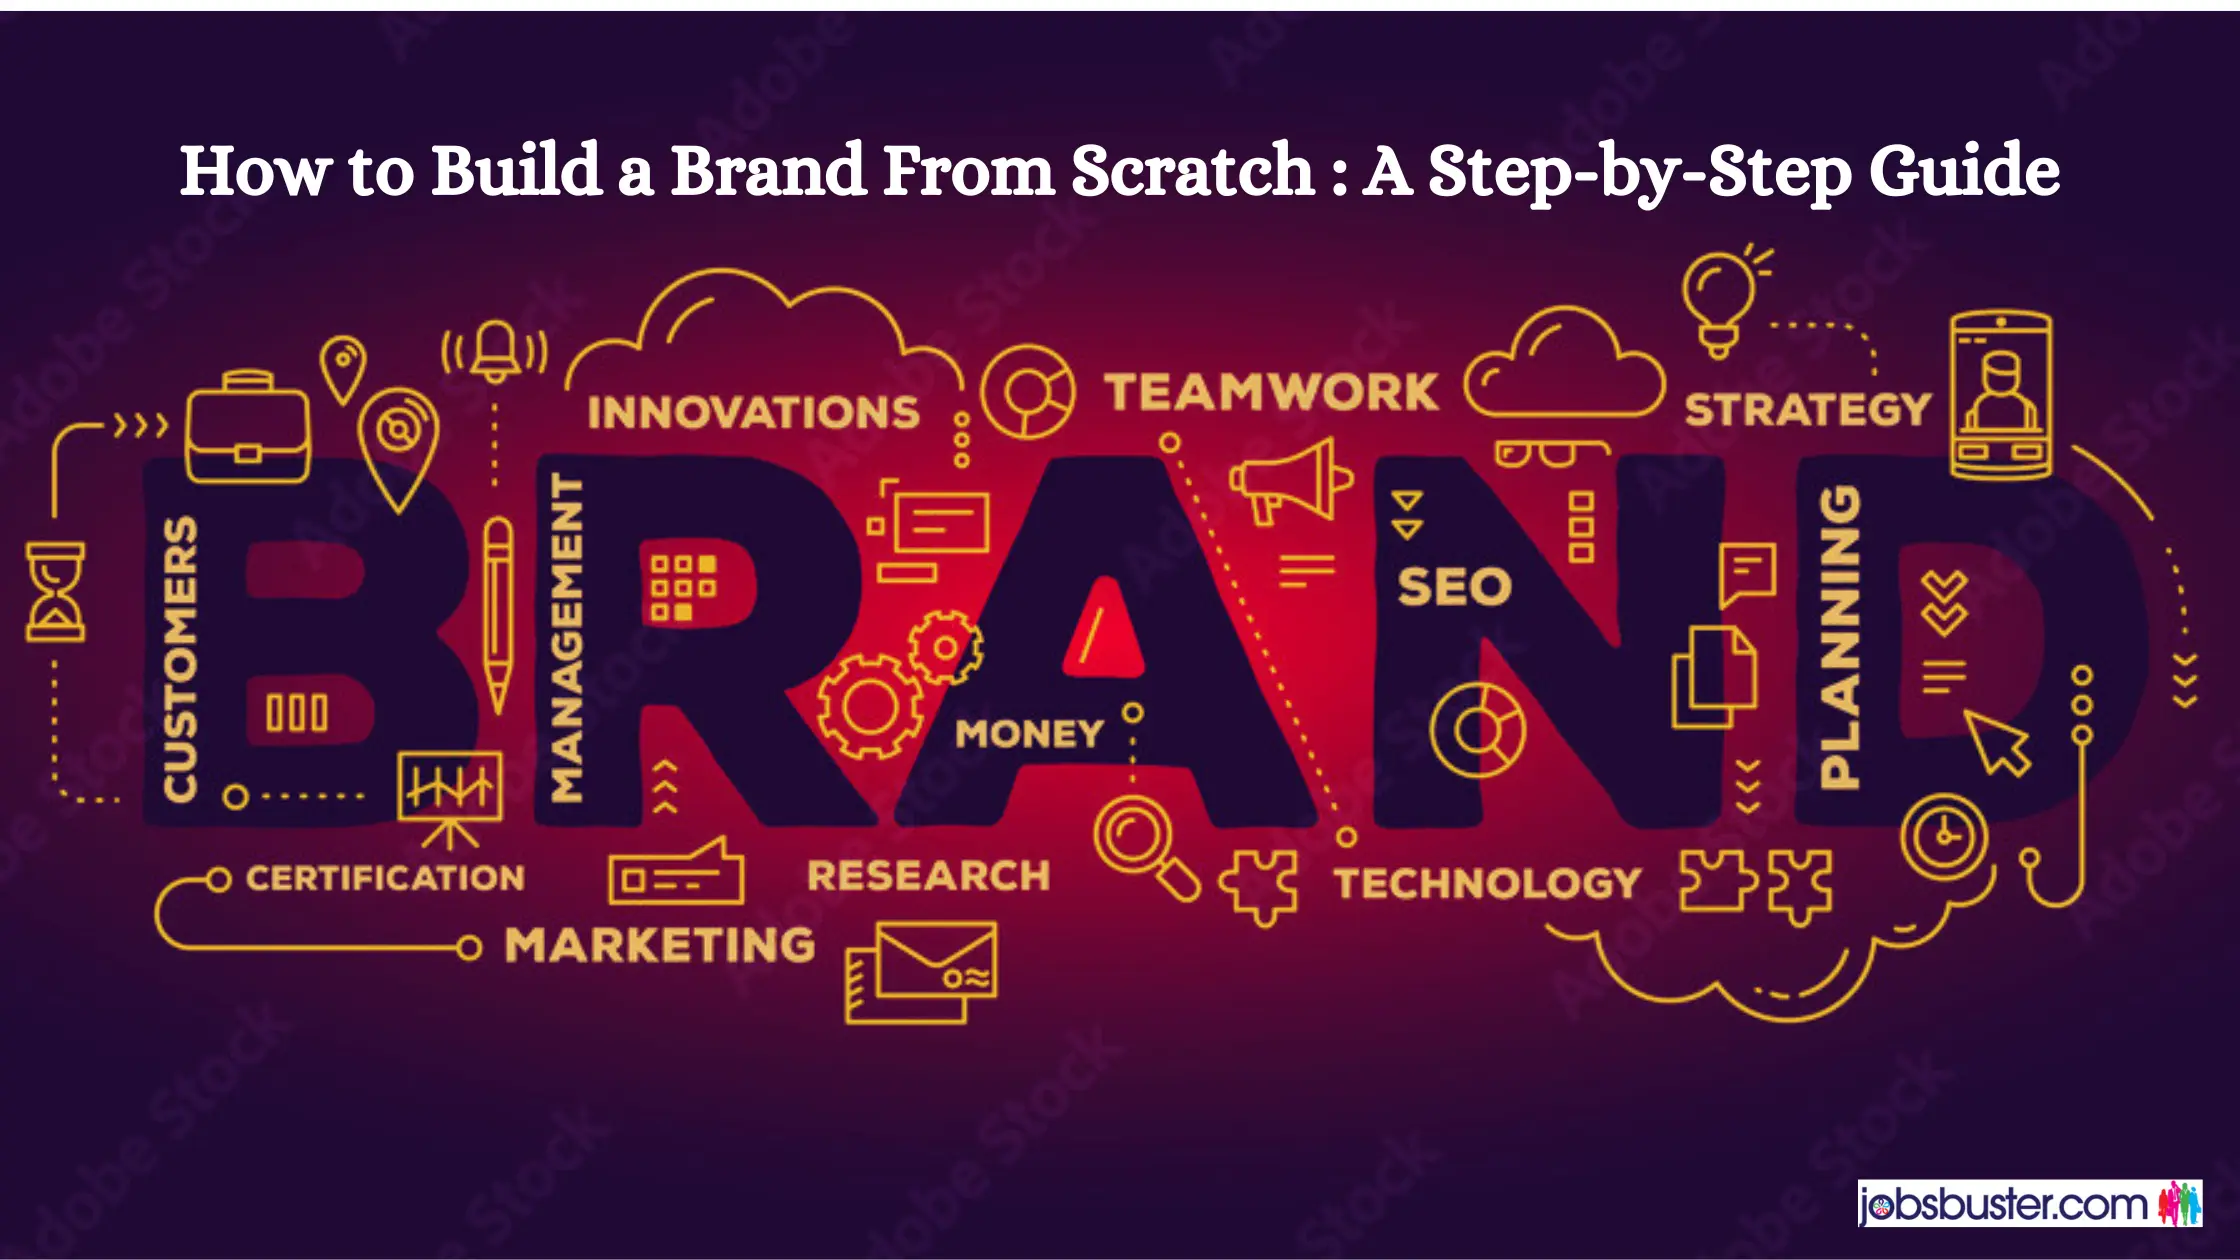 How to Build a Brand From Scratch : A Step-by-Step Guide